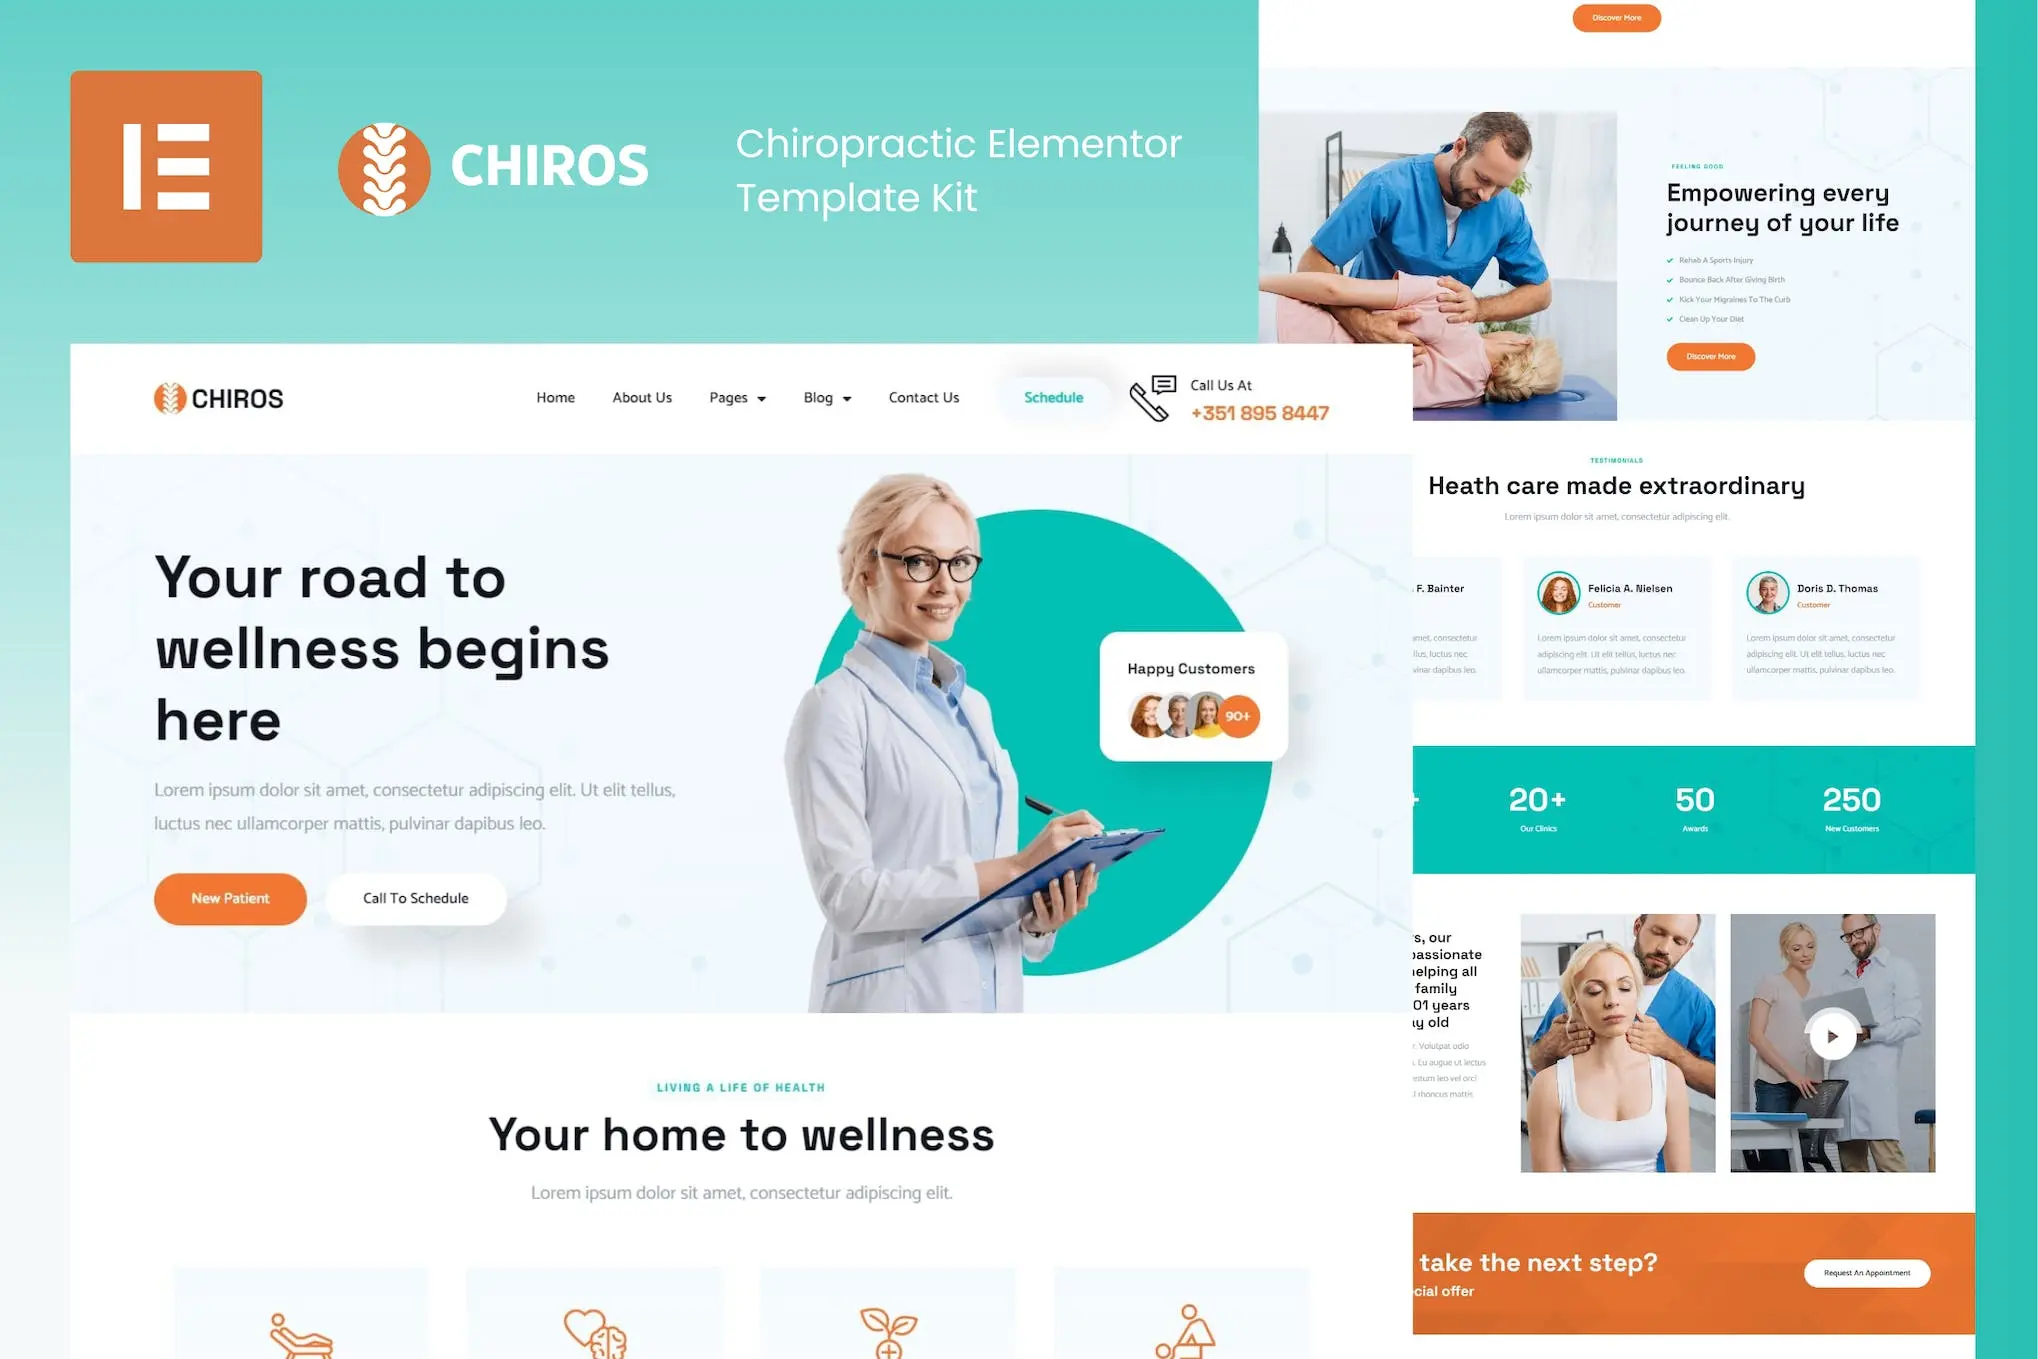 Download the Chiros chiropractic template kit for Elementor